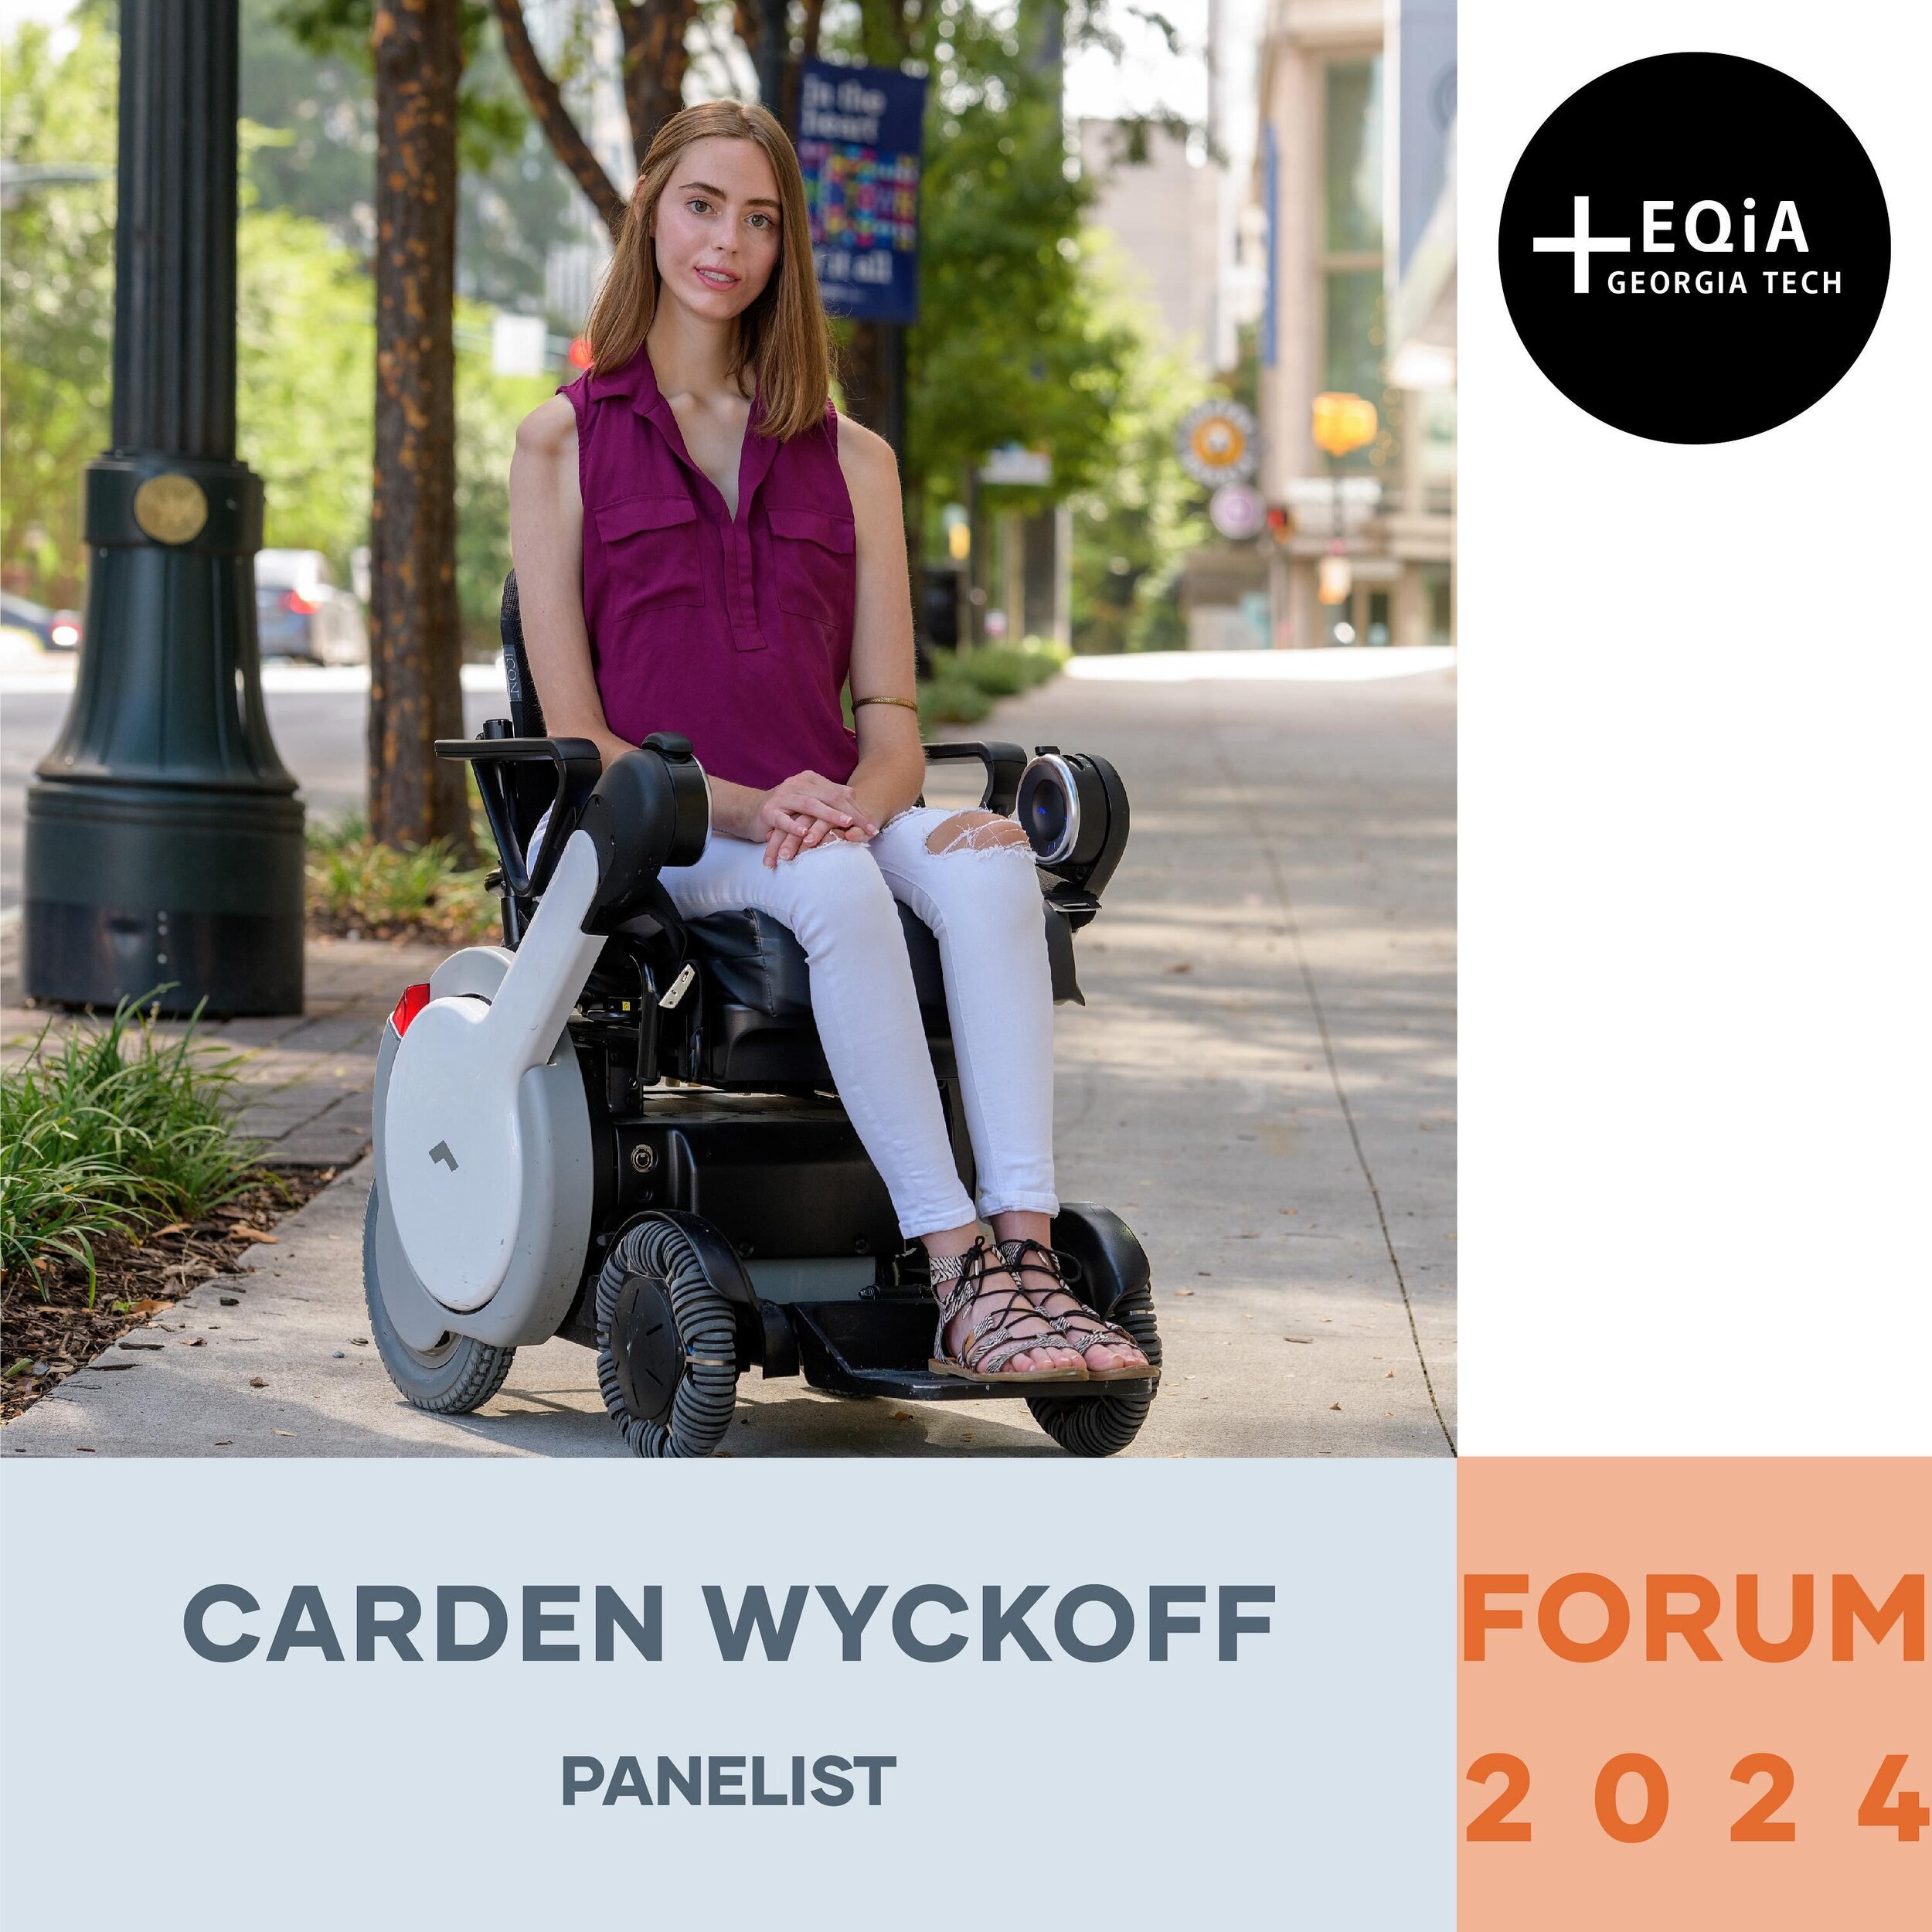 ⭐️ FORUM PANELIST ⭐️ 
Our first of an amazing lineup of panelists is Carden Wyckoff! 
Carden is a certified professional in web accessibility (CPWA), Atlanta native, disability advocate, wheelchair roller, transit rider and change maker. She has 15 y